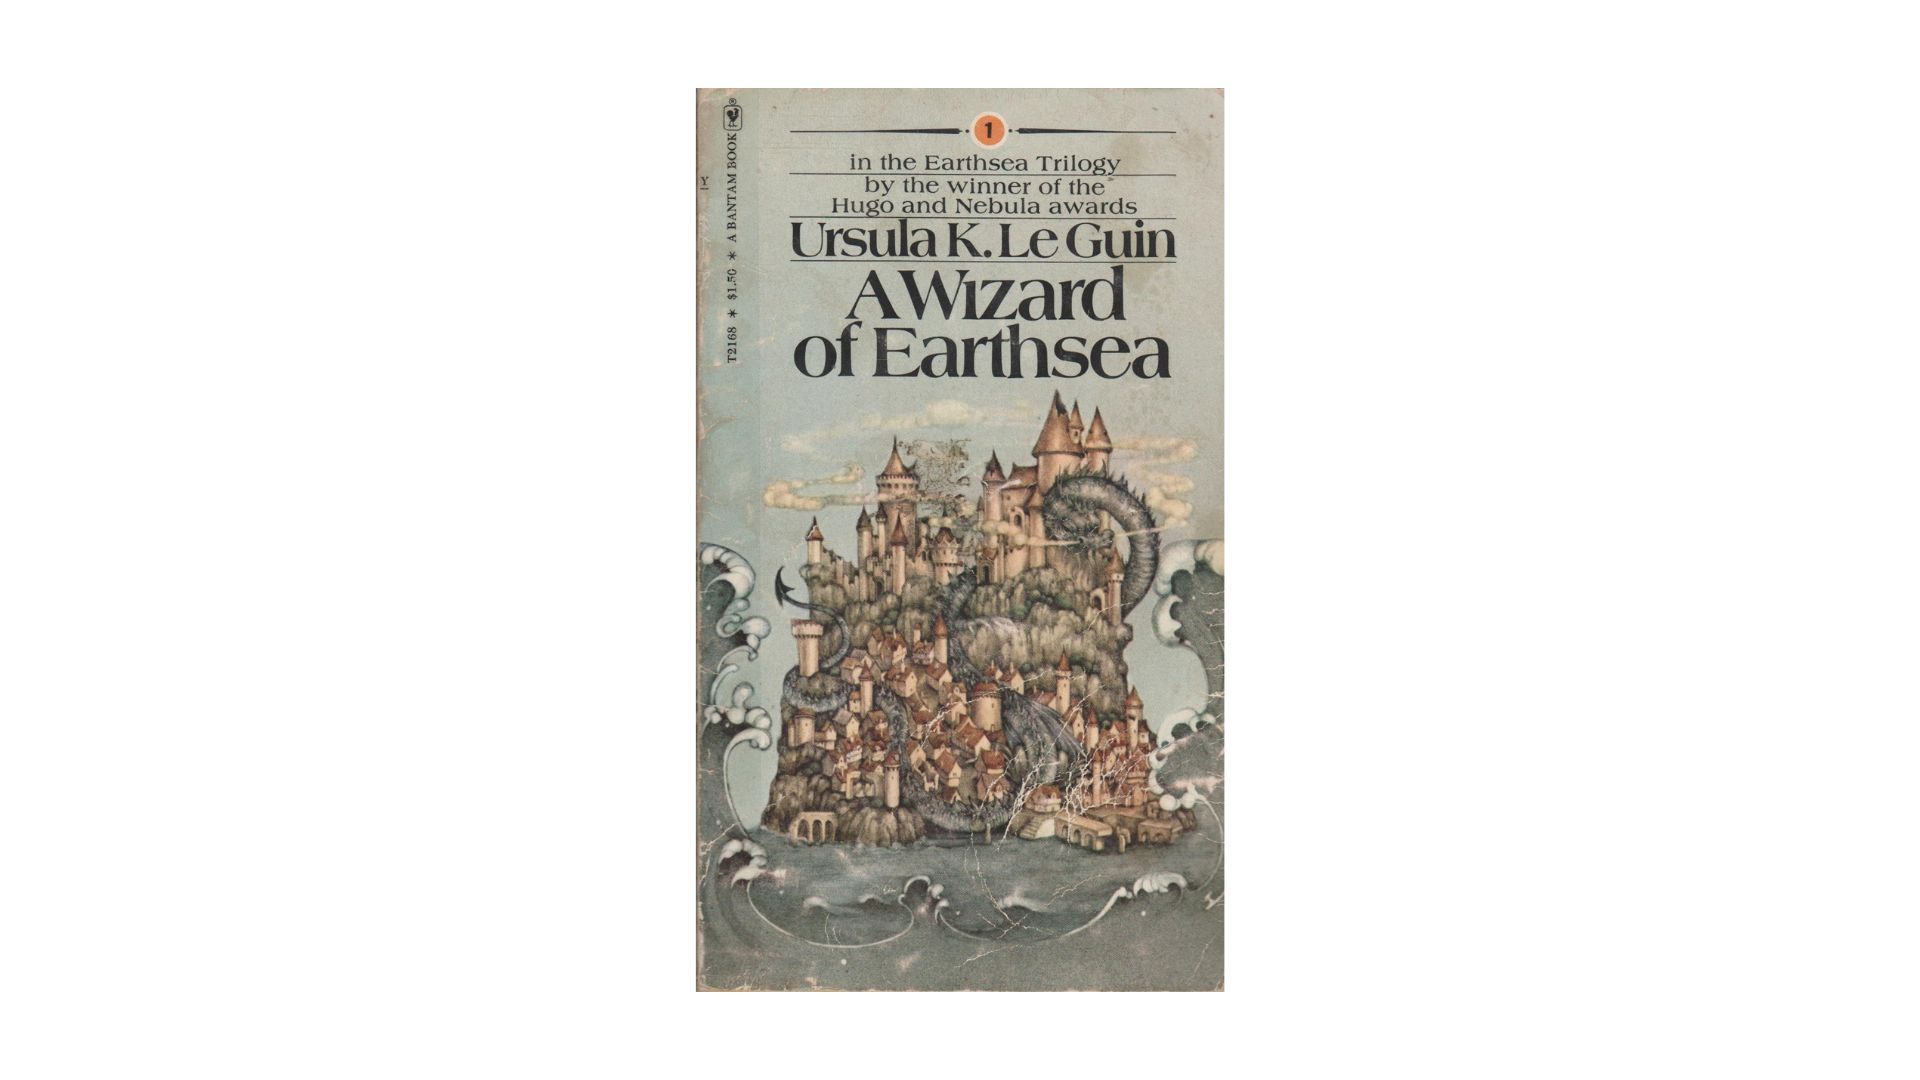 A Wizard of Earthsea by Ursula K. Le Guin Old Book Cover